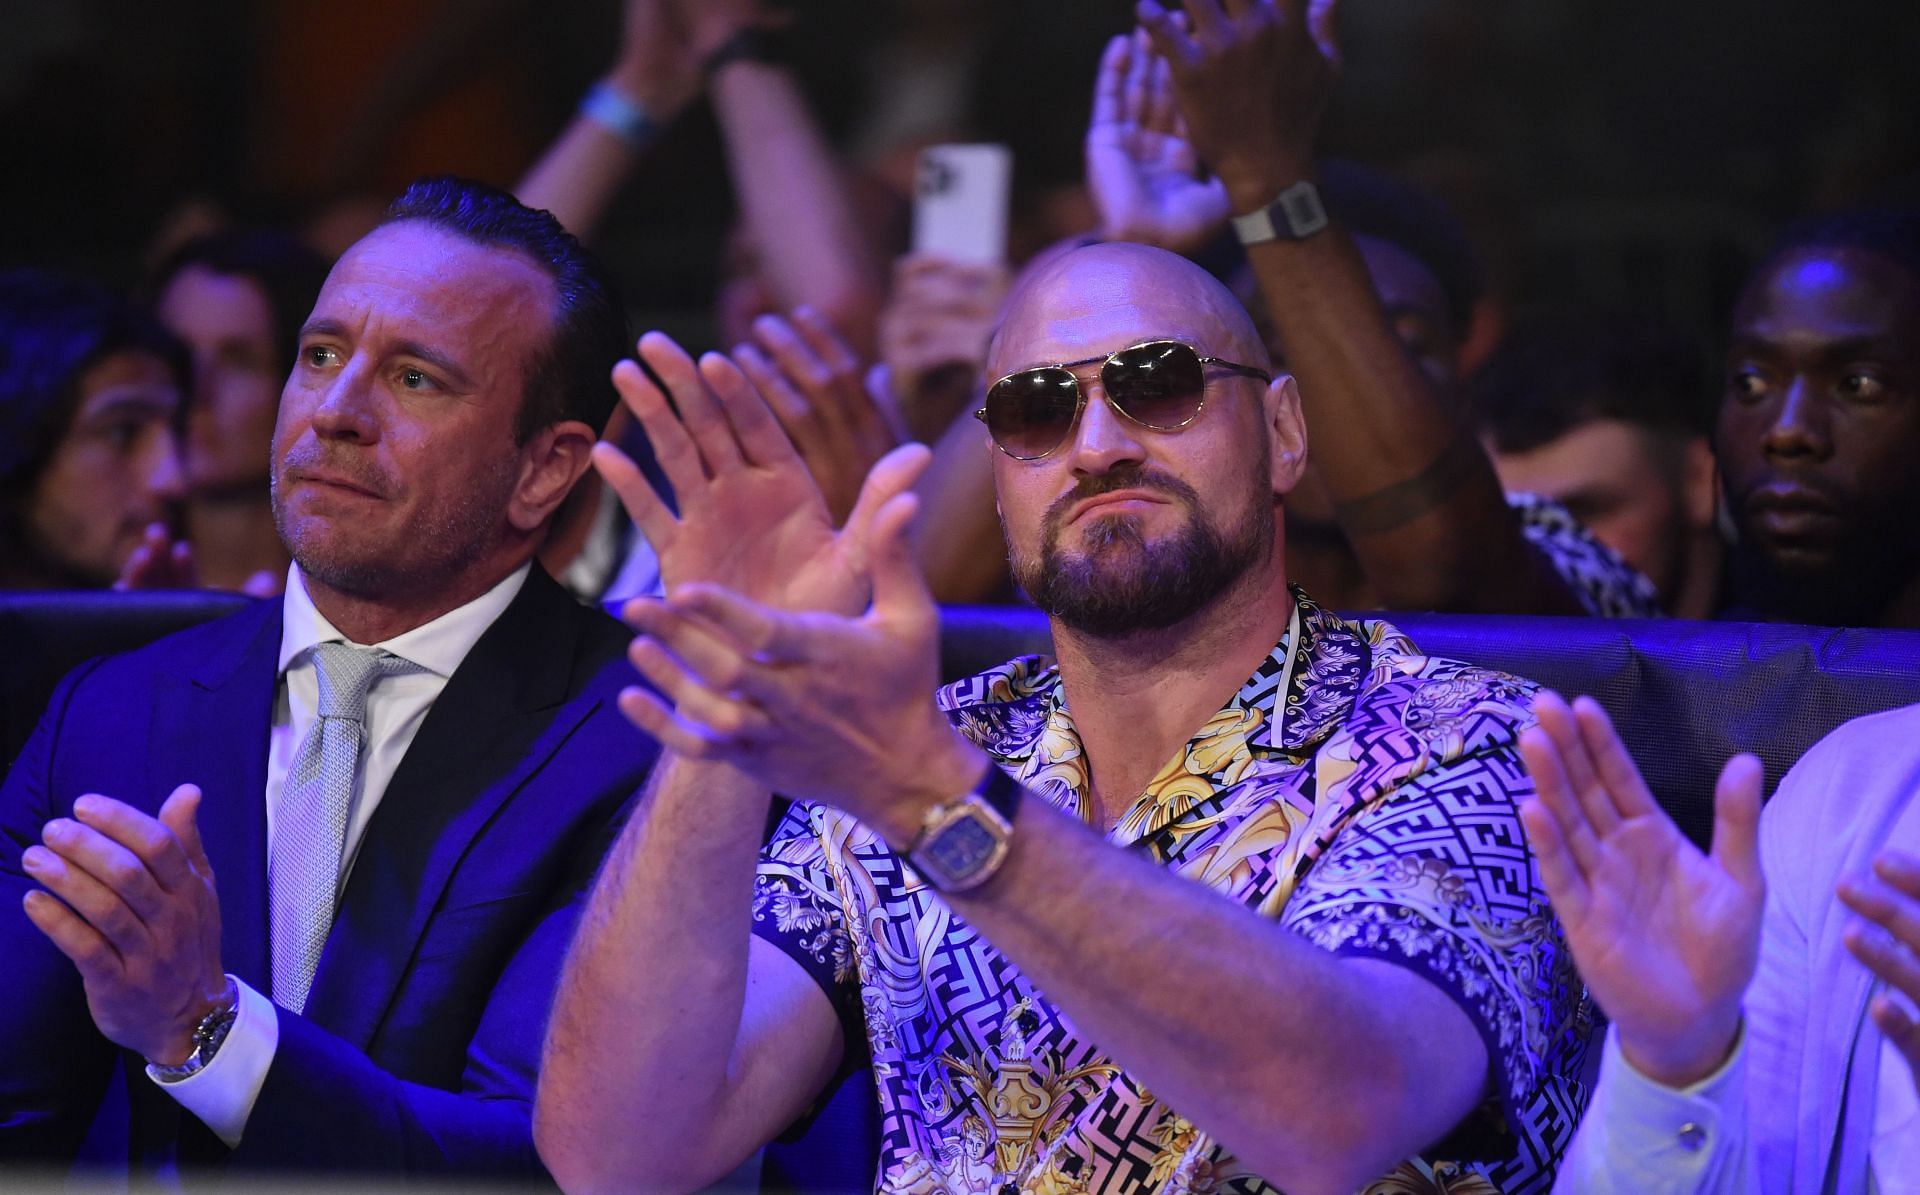 Tyson Fury at a boxing show in Liverpool